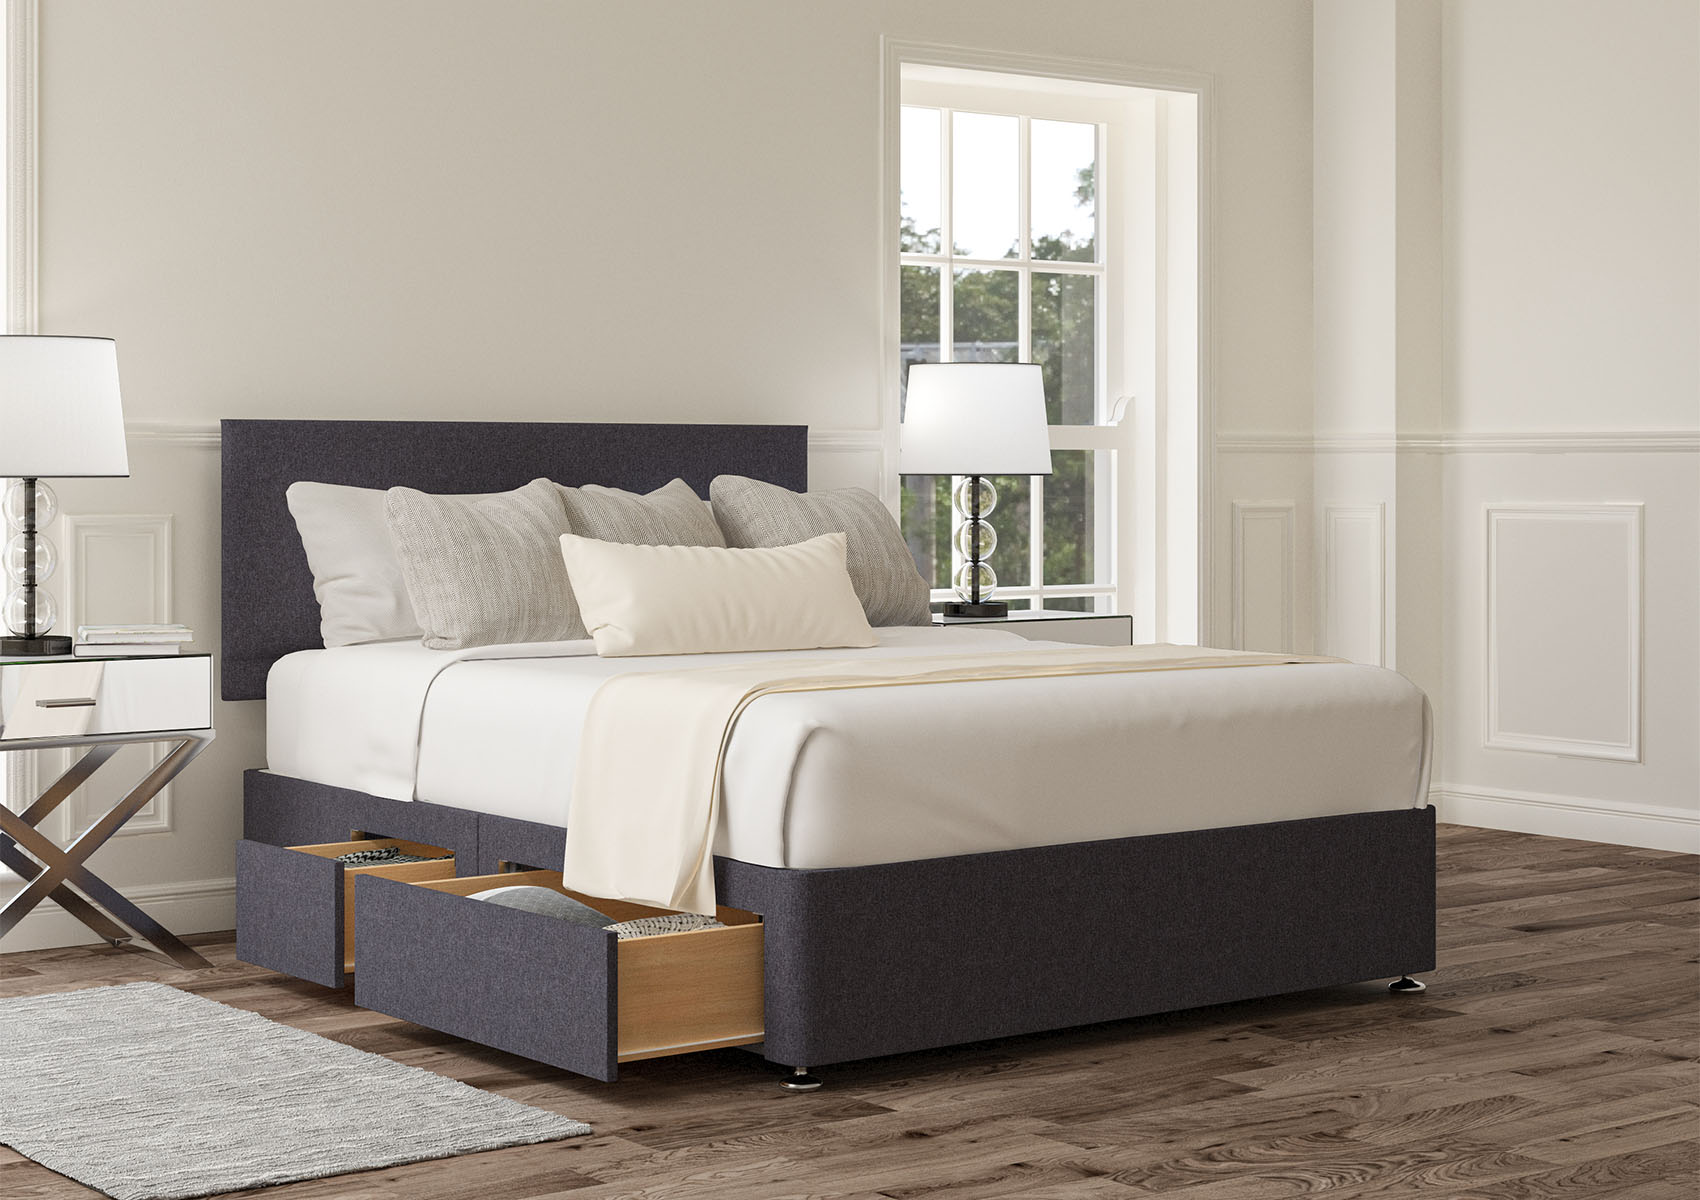 View Henley Verona Silver Upholstered Single Divan Bed Time4Sleep information